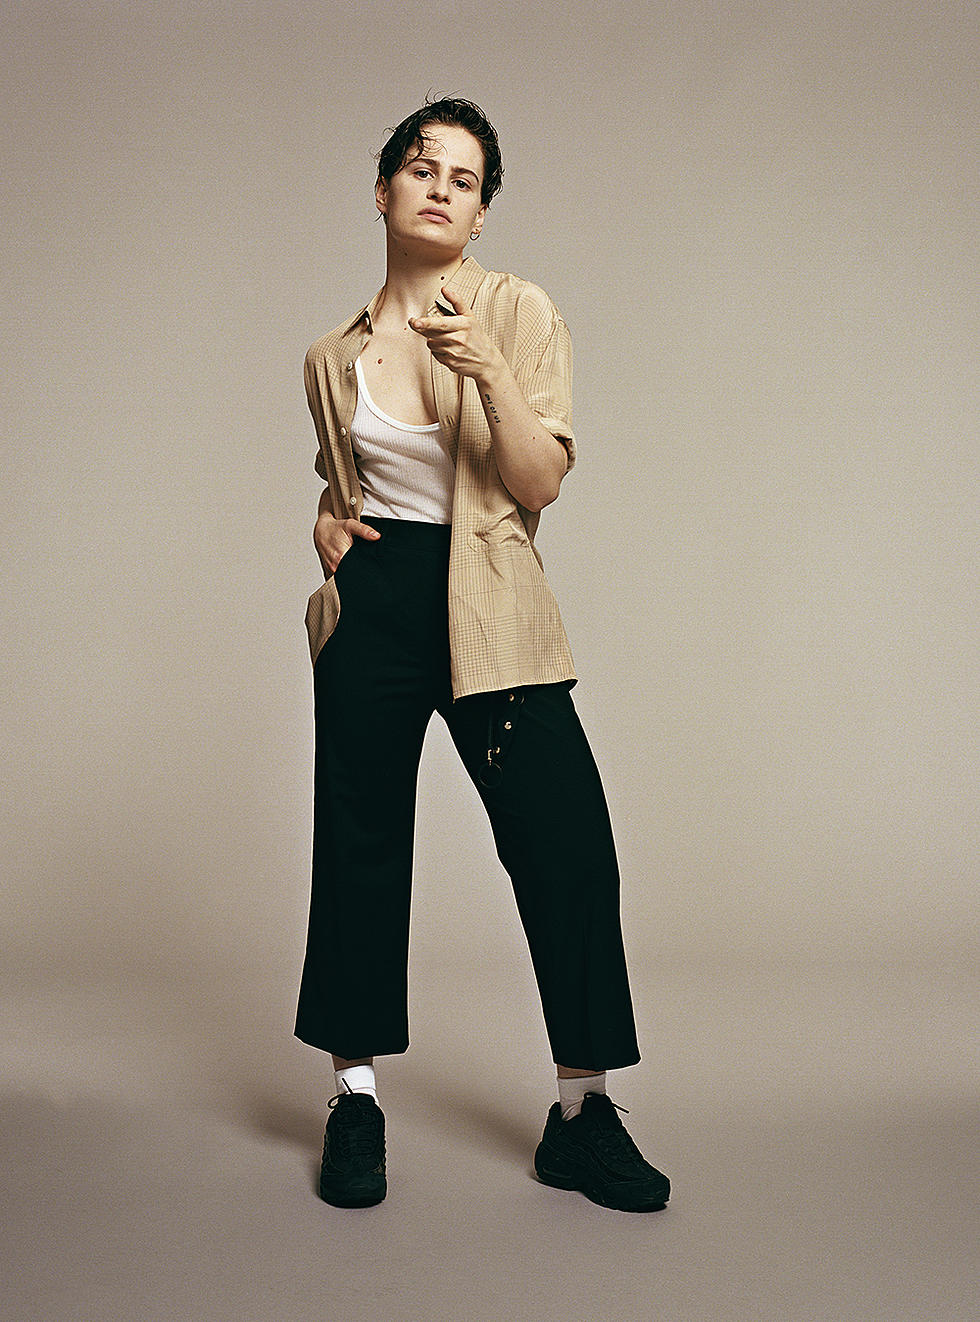 Christine and the Queens prep new LP, touring, playing NYC on Halloween (BV presale)